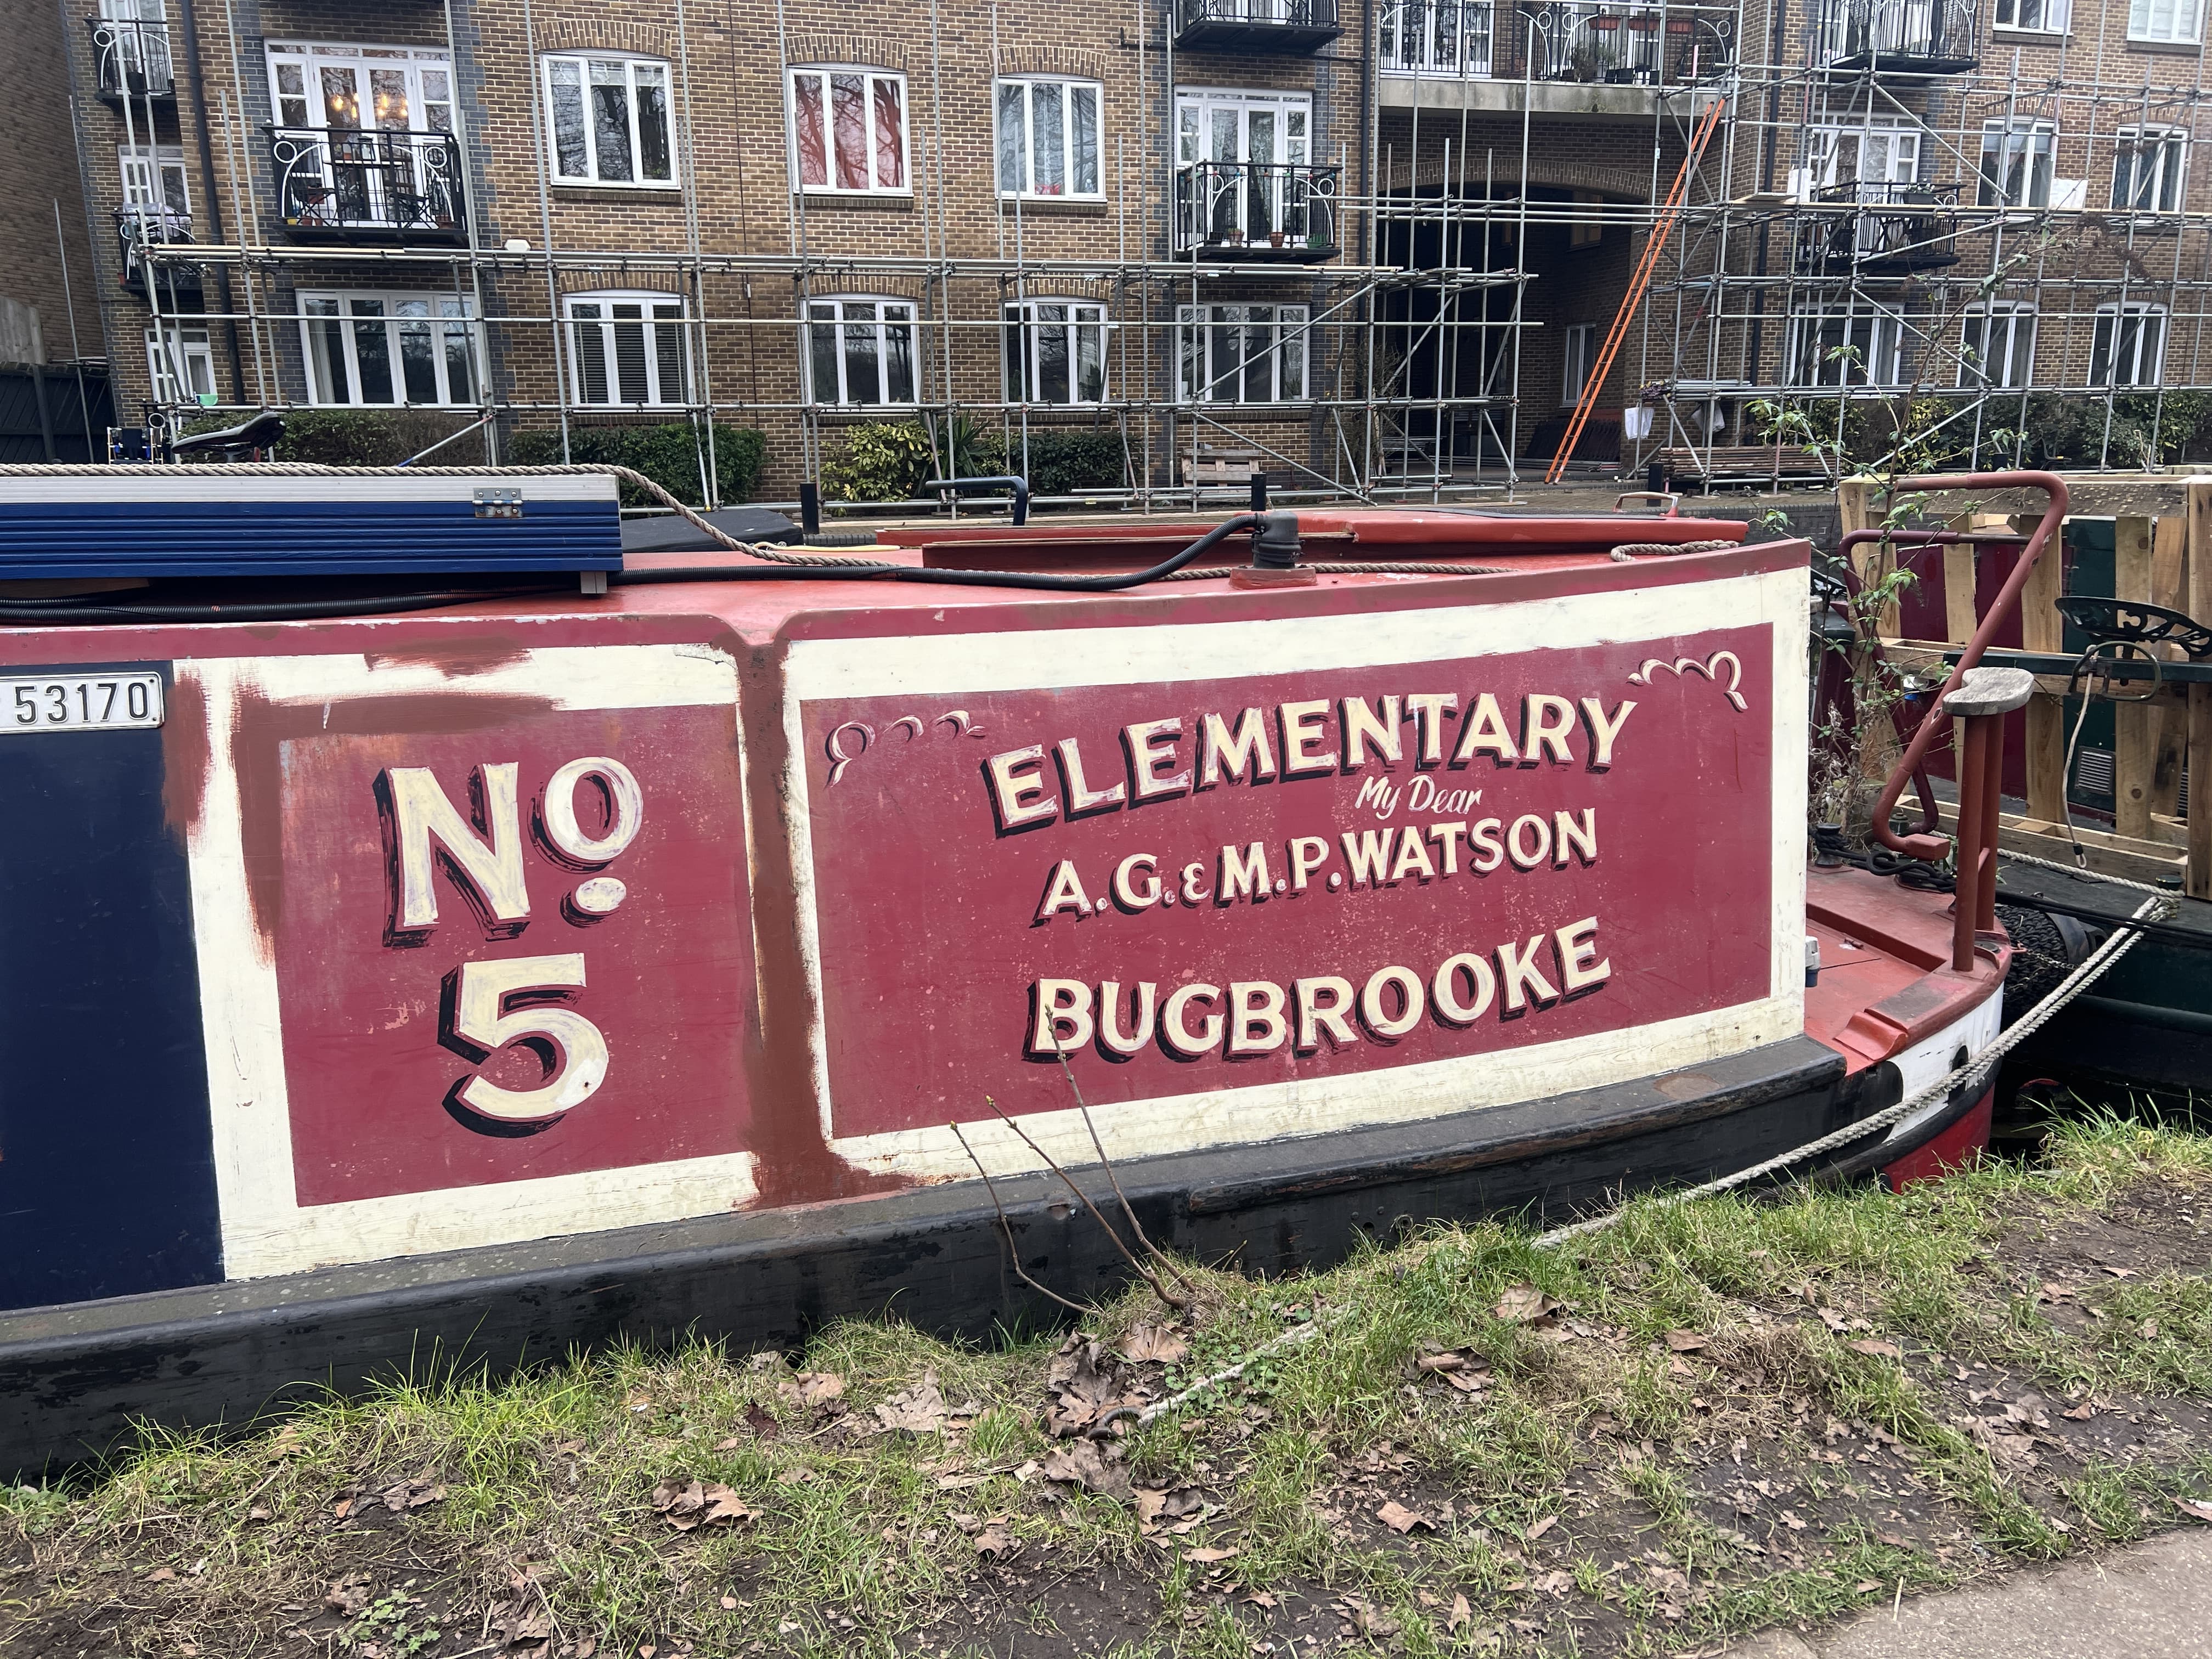 Narrowboat moored on the canal with handpainted signage